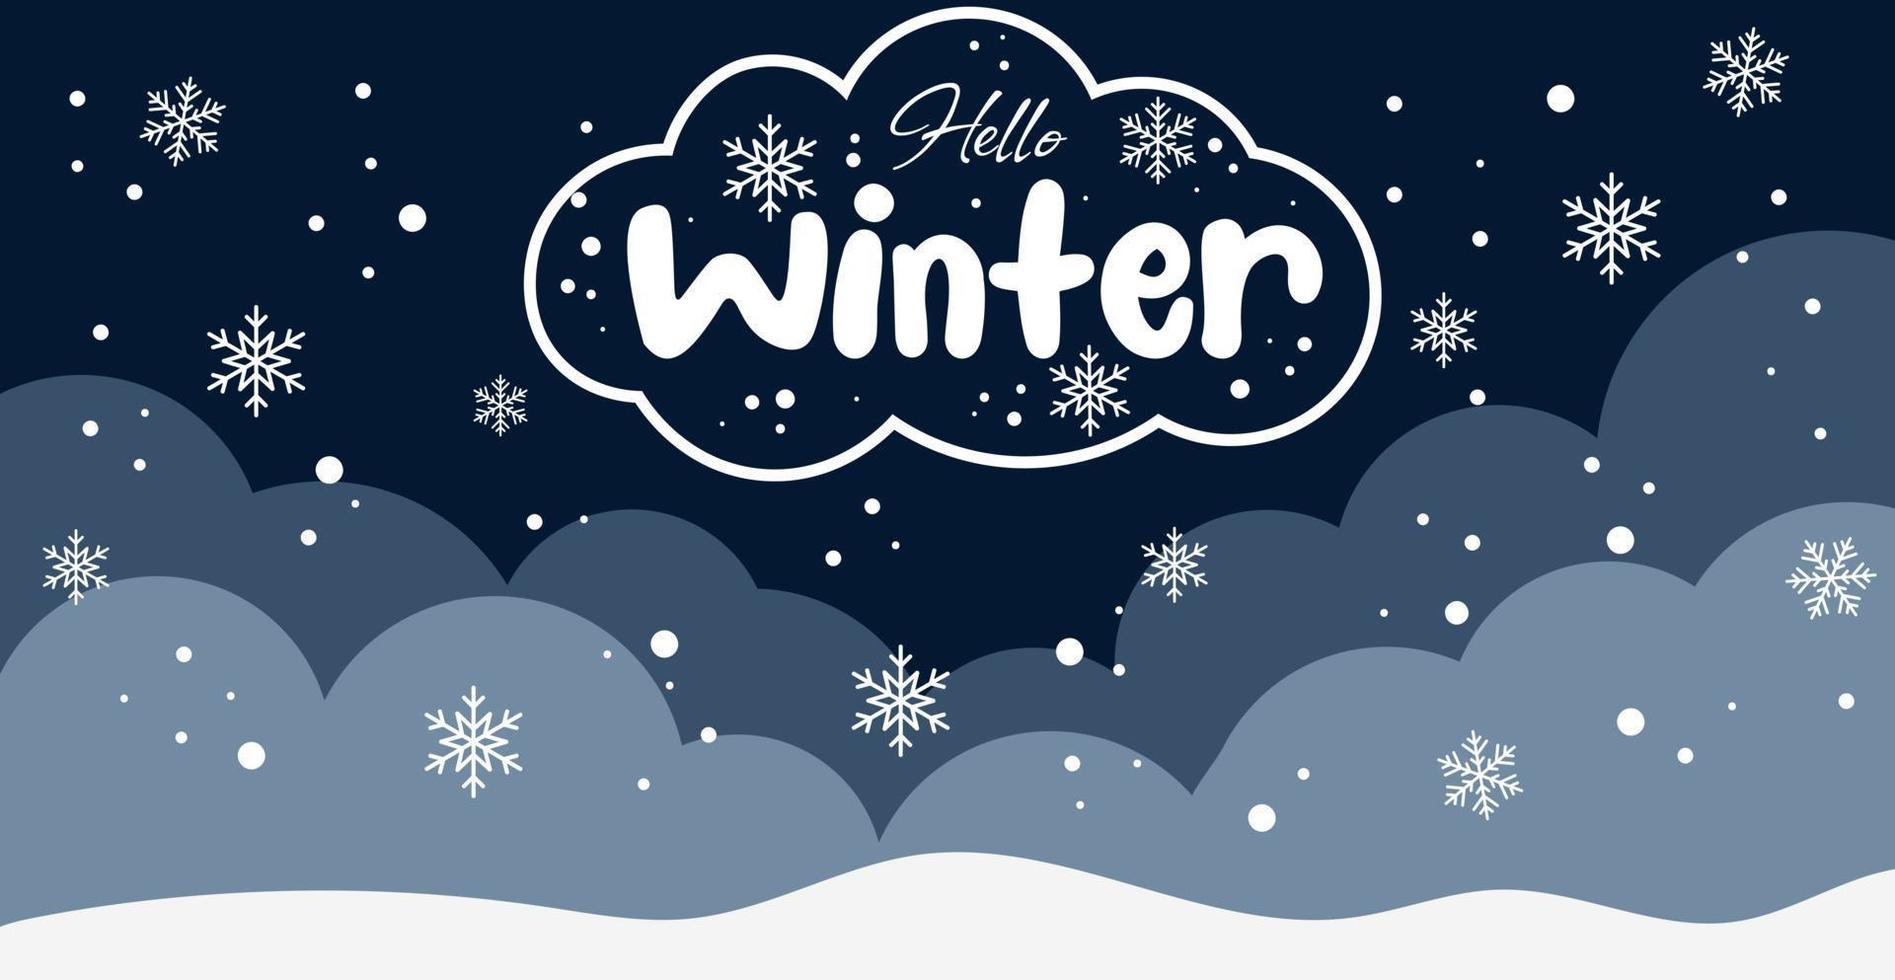 Cartoon winter background with snowdrifts, snow and lettering hello winter vector